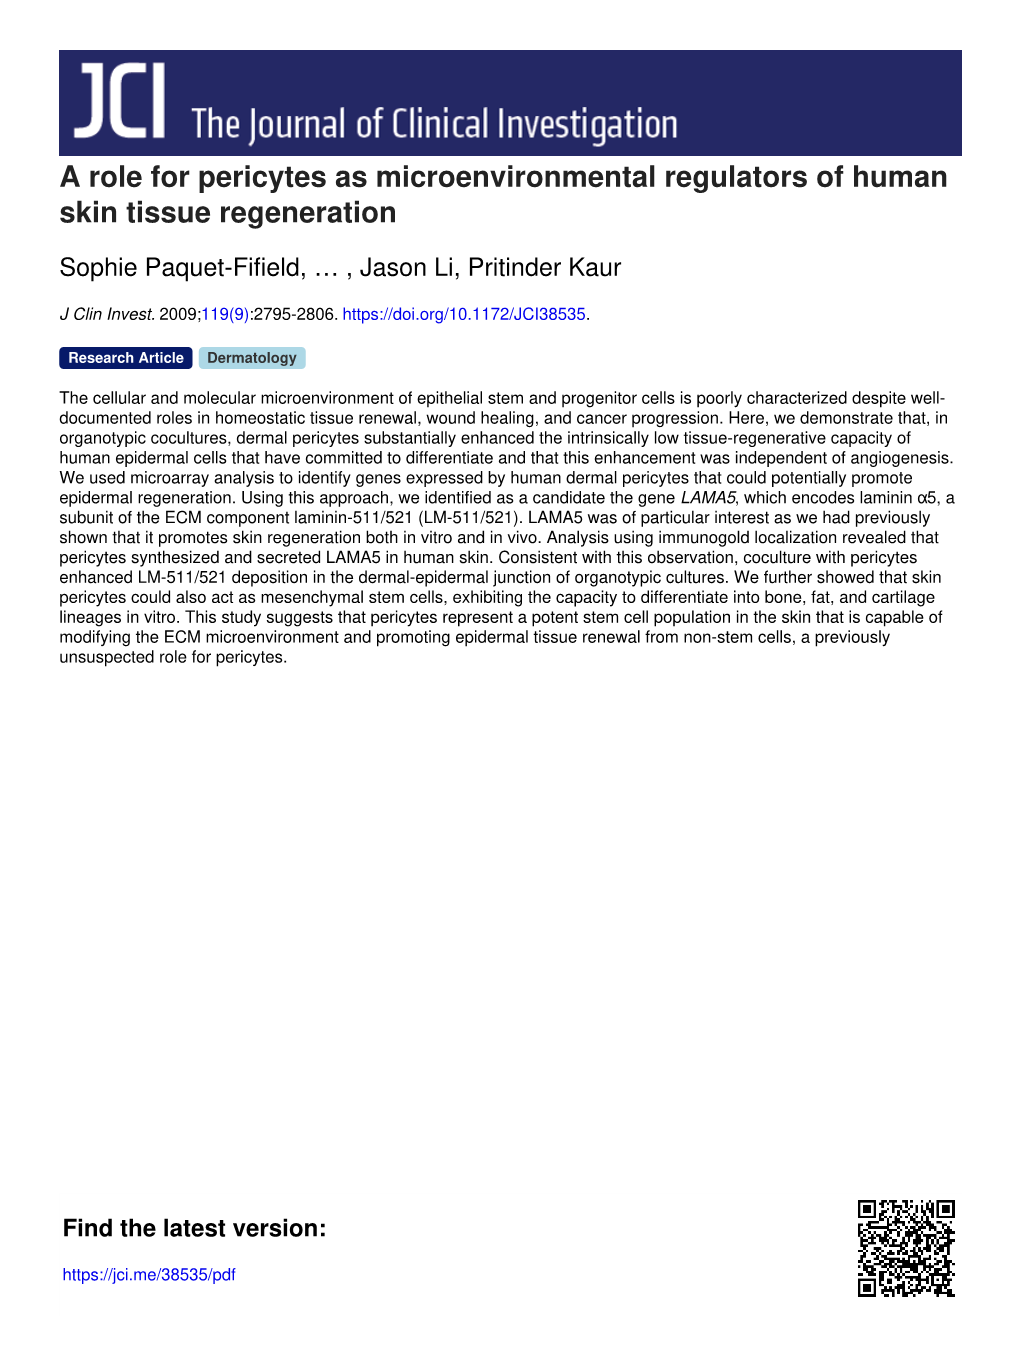 A Role for Pericytes As Microenvironmental Regulators of Human Skin Tissue Regeneration